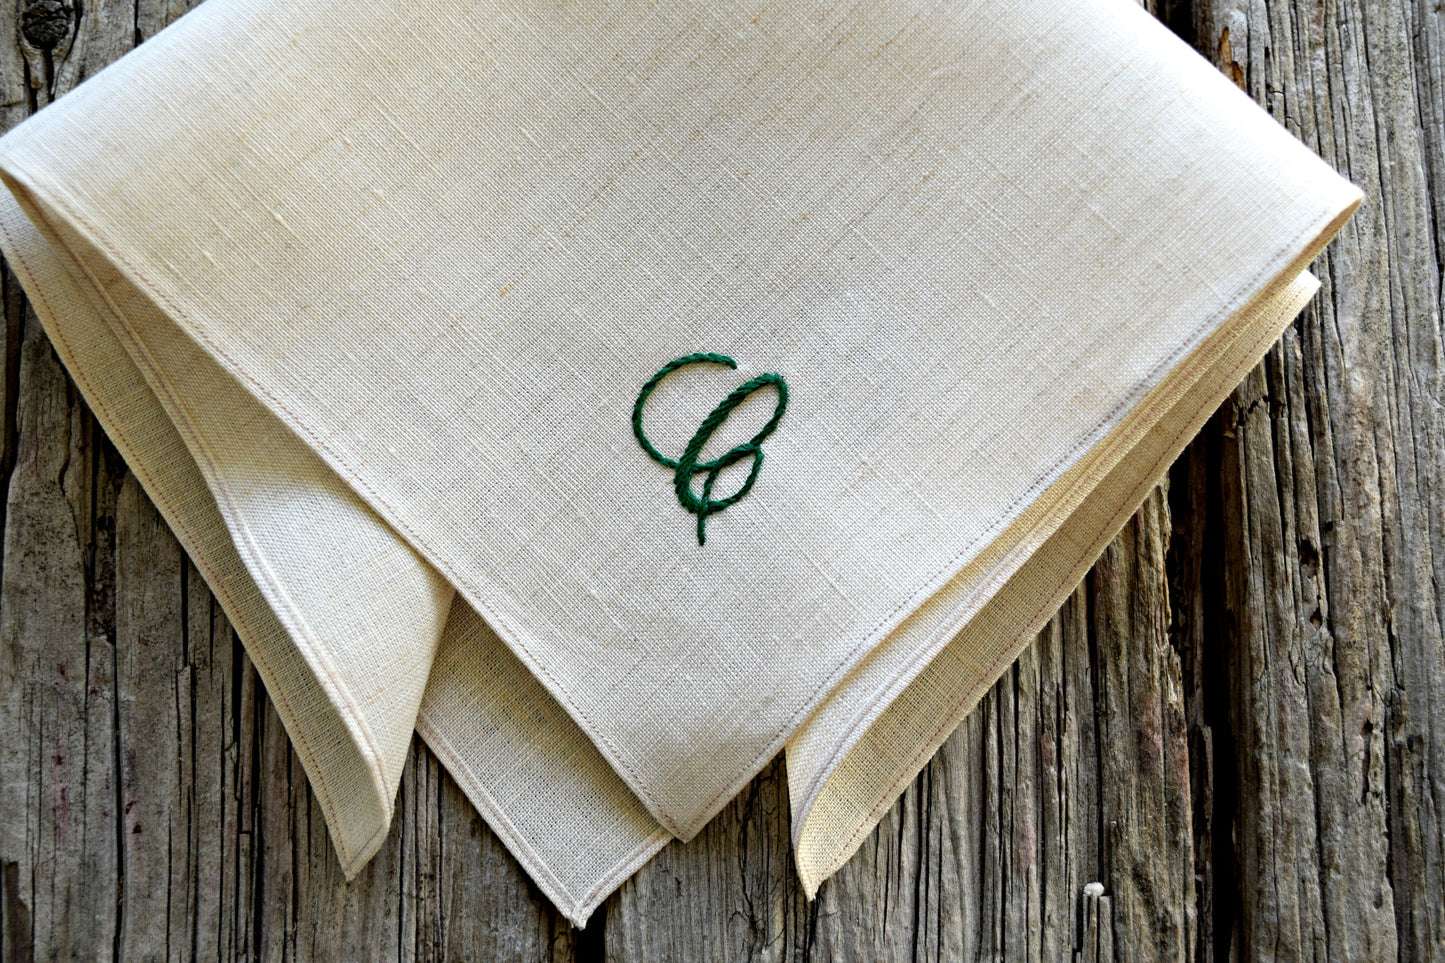 Closeup of natural colored linen pocket square with hand embroidered C in green, in cursive script